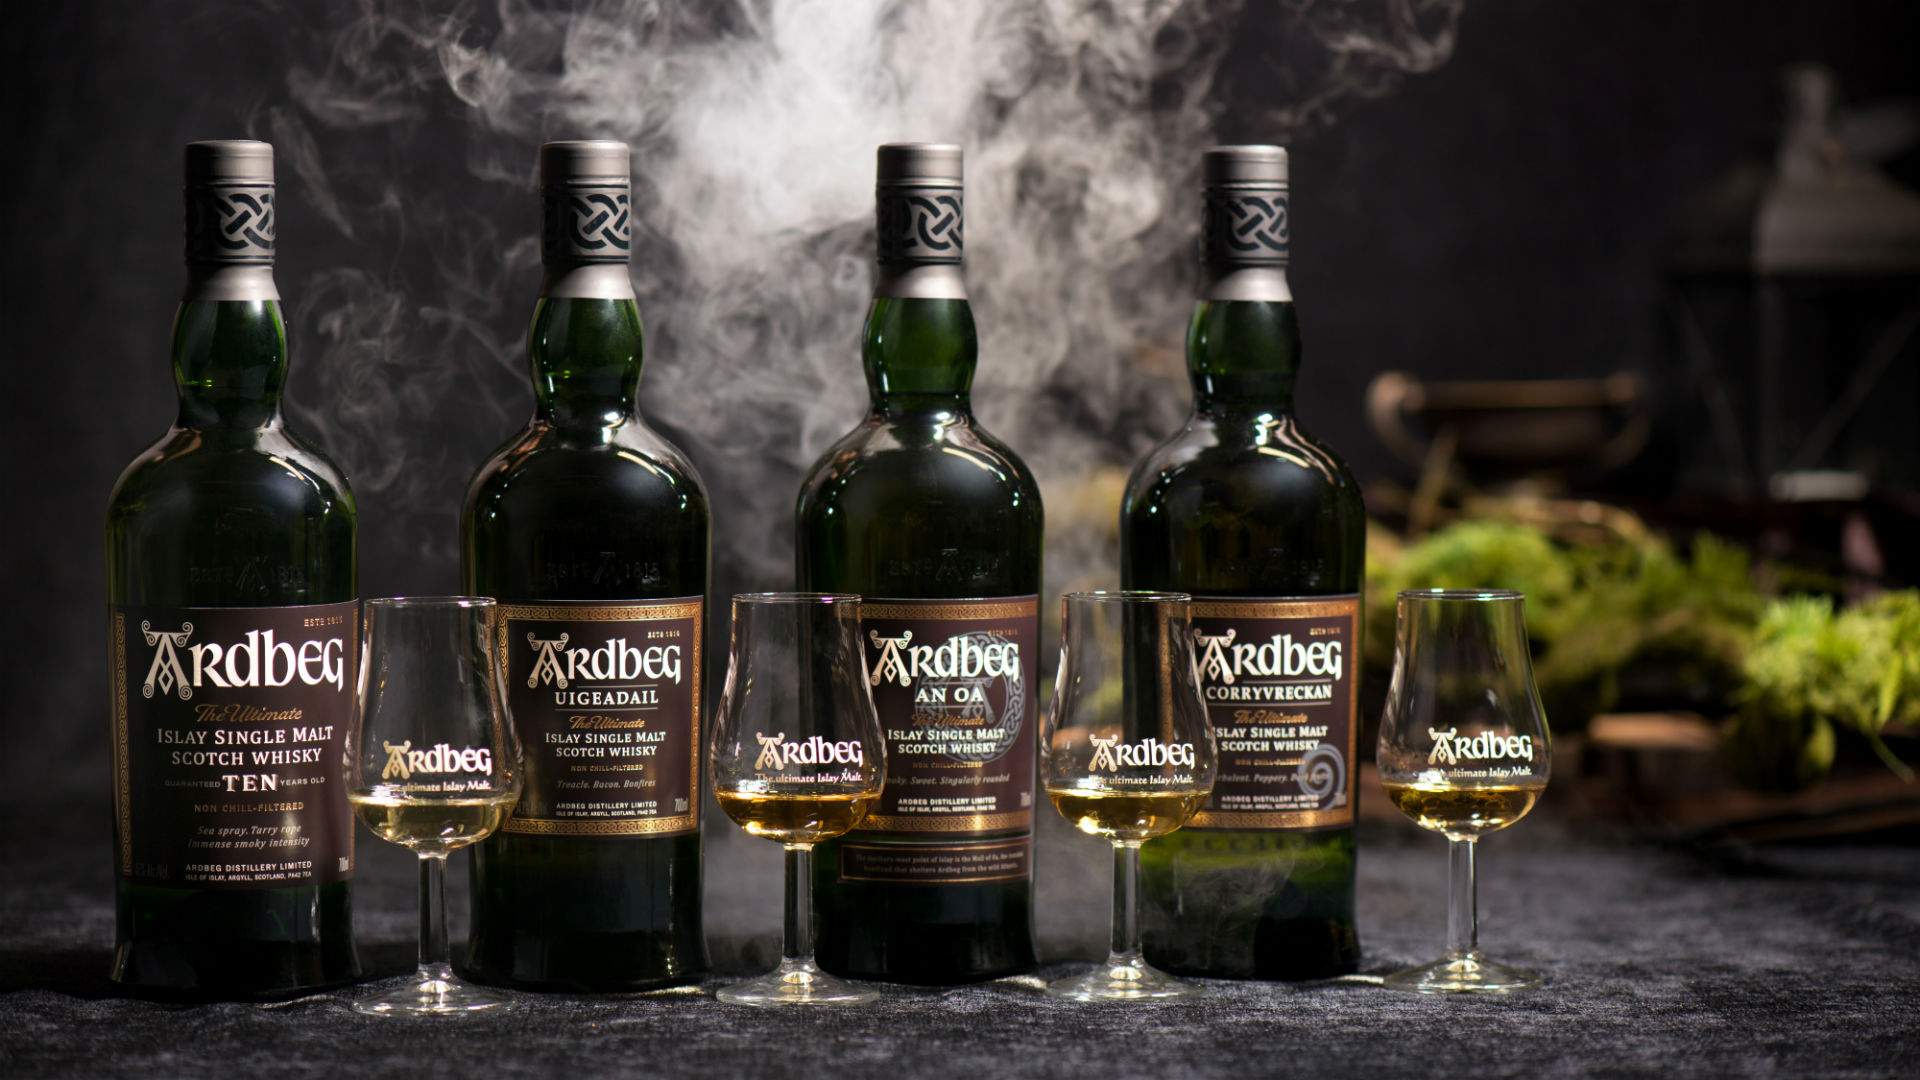 The Ardbeg Smokehouse at Websters